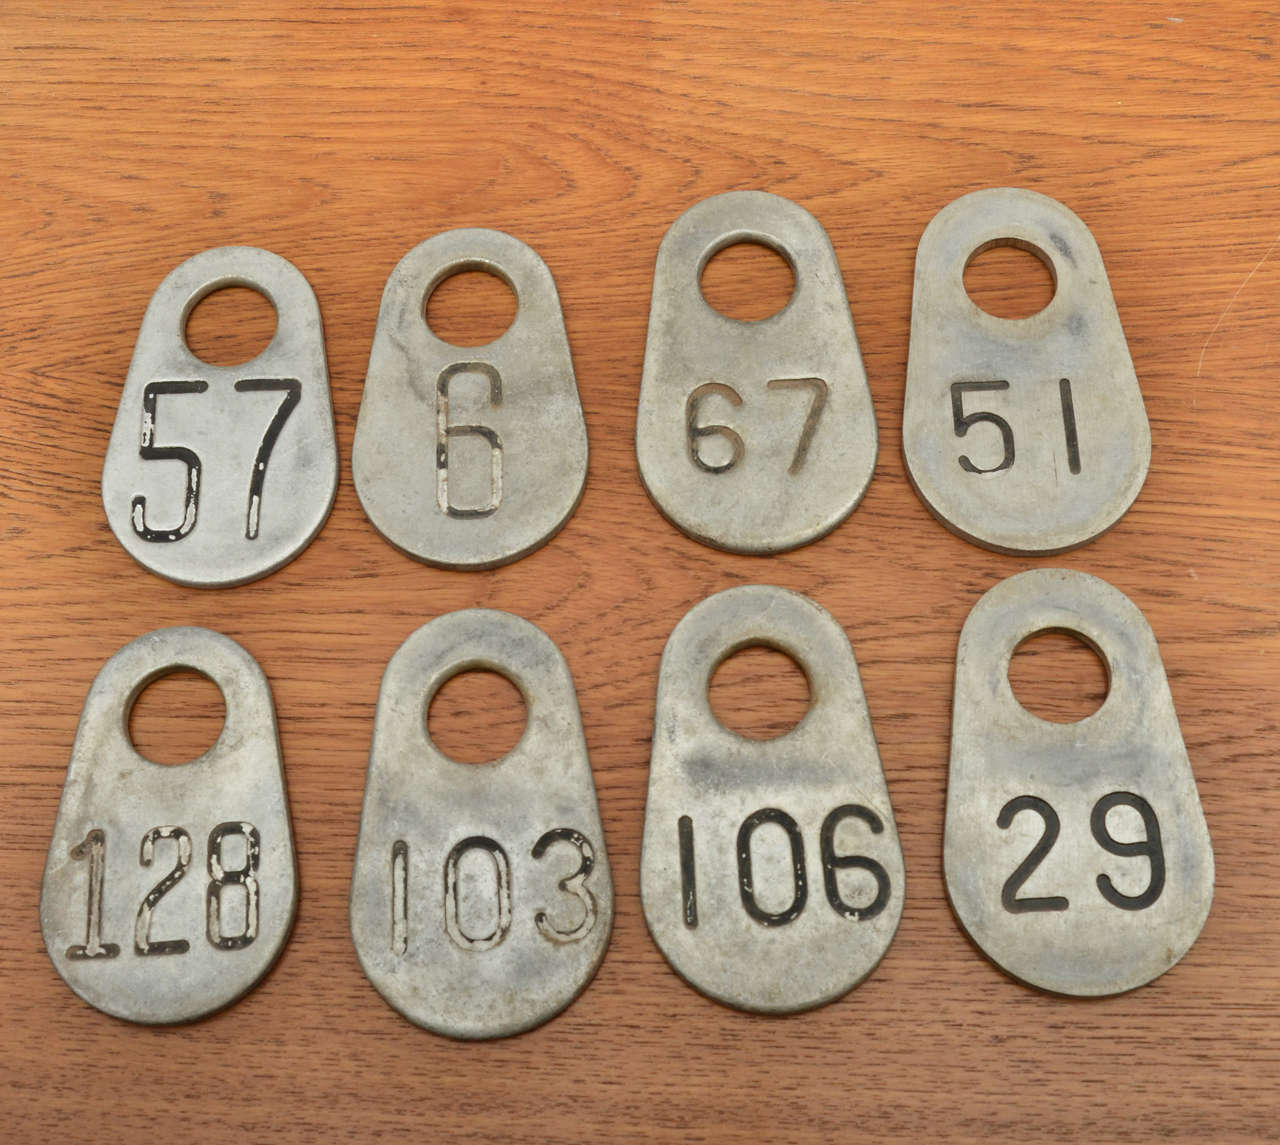 Numbered vintage tags from American cattle farm.